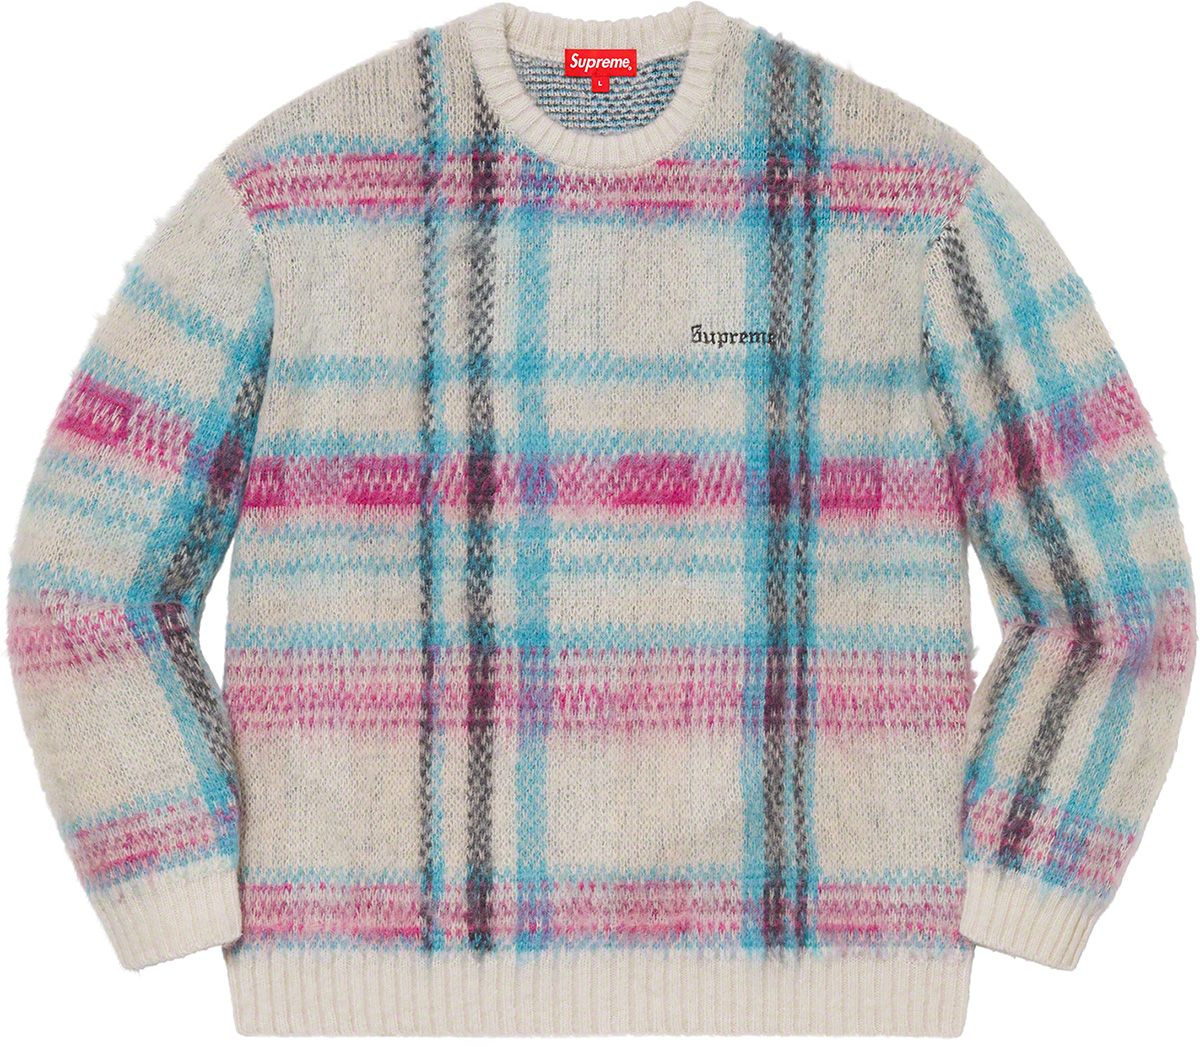 Brushed Plaid Sweater - Fall/Winter 2020 Preview – Supreme